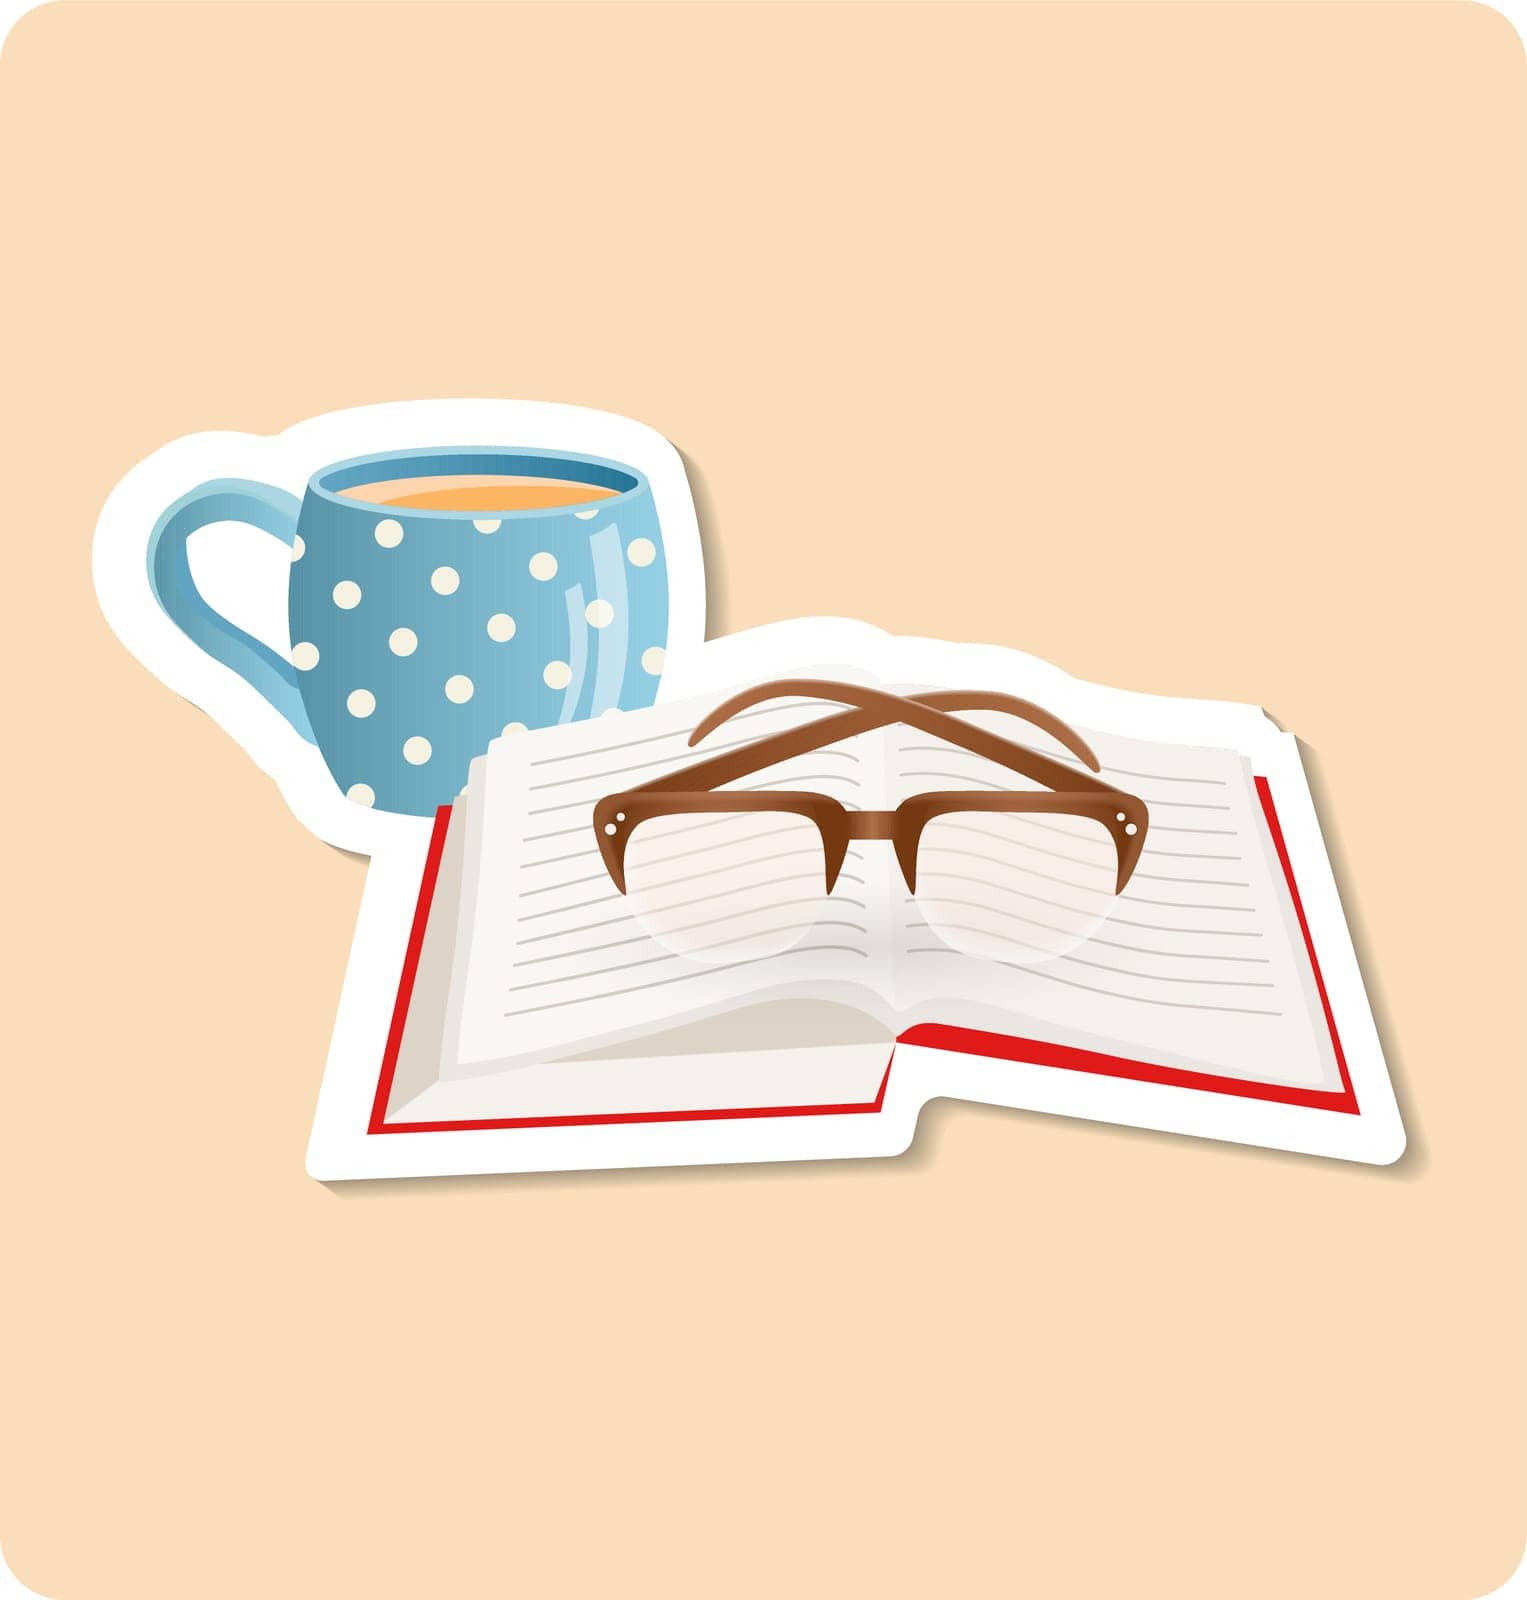 Glasses sticker illustration. Cup, coffee, spectacles, notebook. Vector graphics.